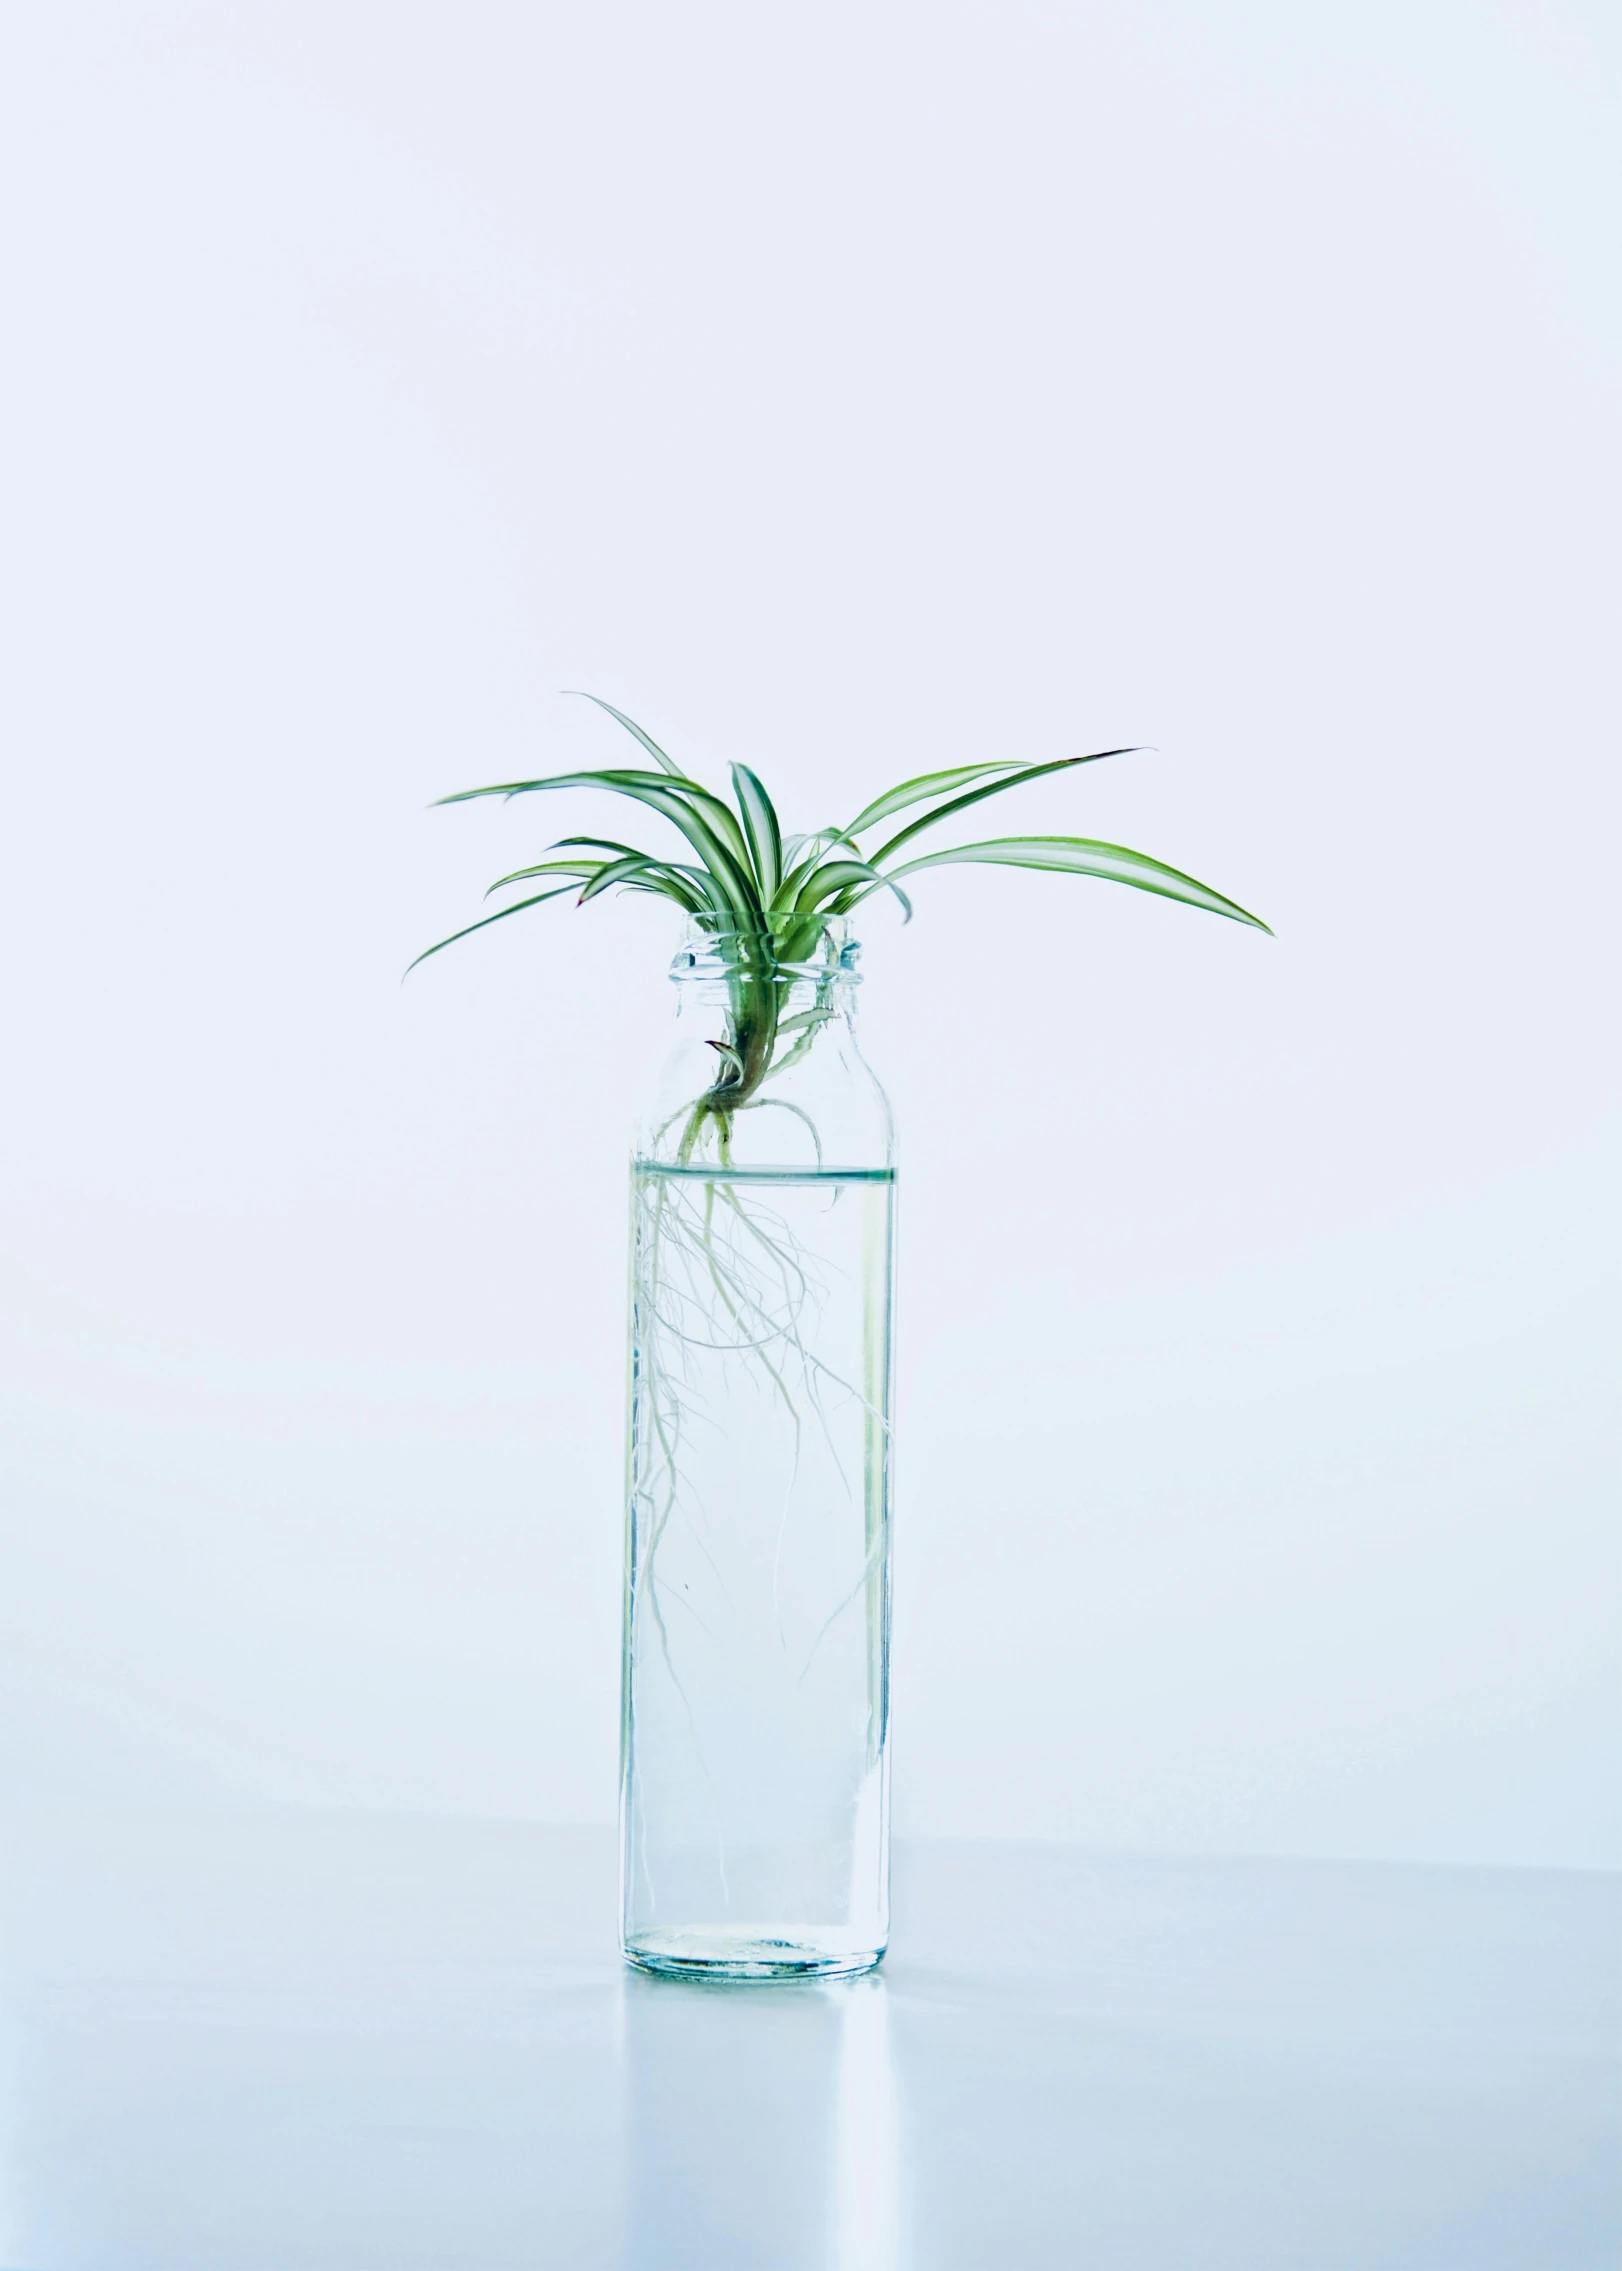 a plant in a glass vase on a table, inspired by Shigeru Aoki, unsplash, minimalism, water bottle queen, intertwined full body view, detailed product image, bioart